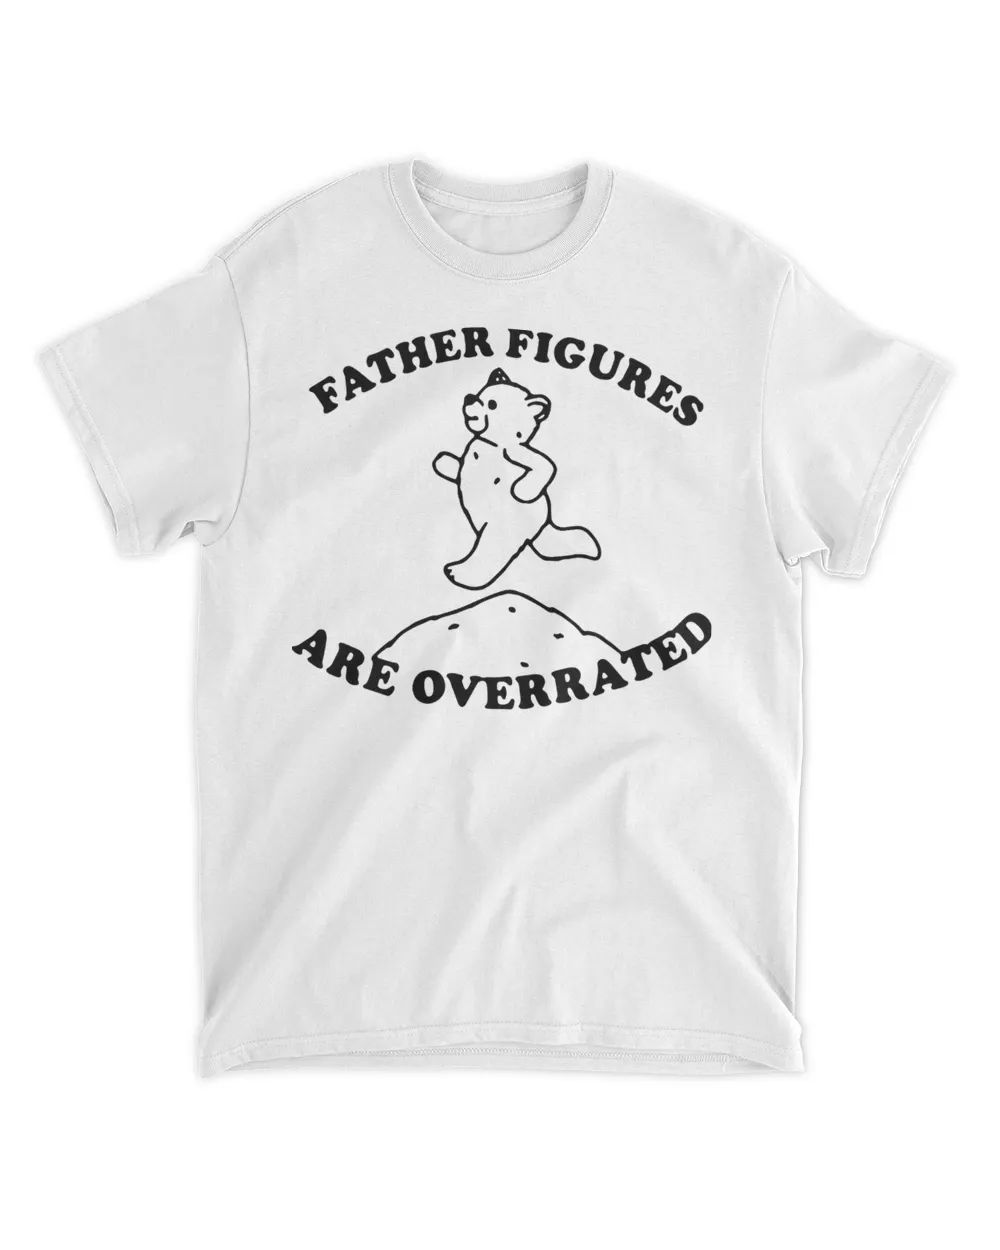 Father Figures Are Overrated Shirt Unisex Standard T-Shirt white 